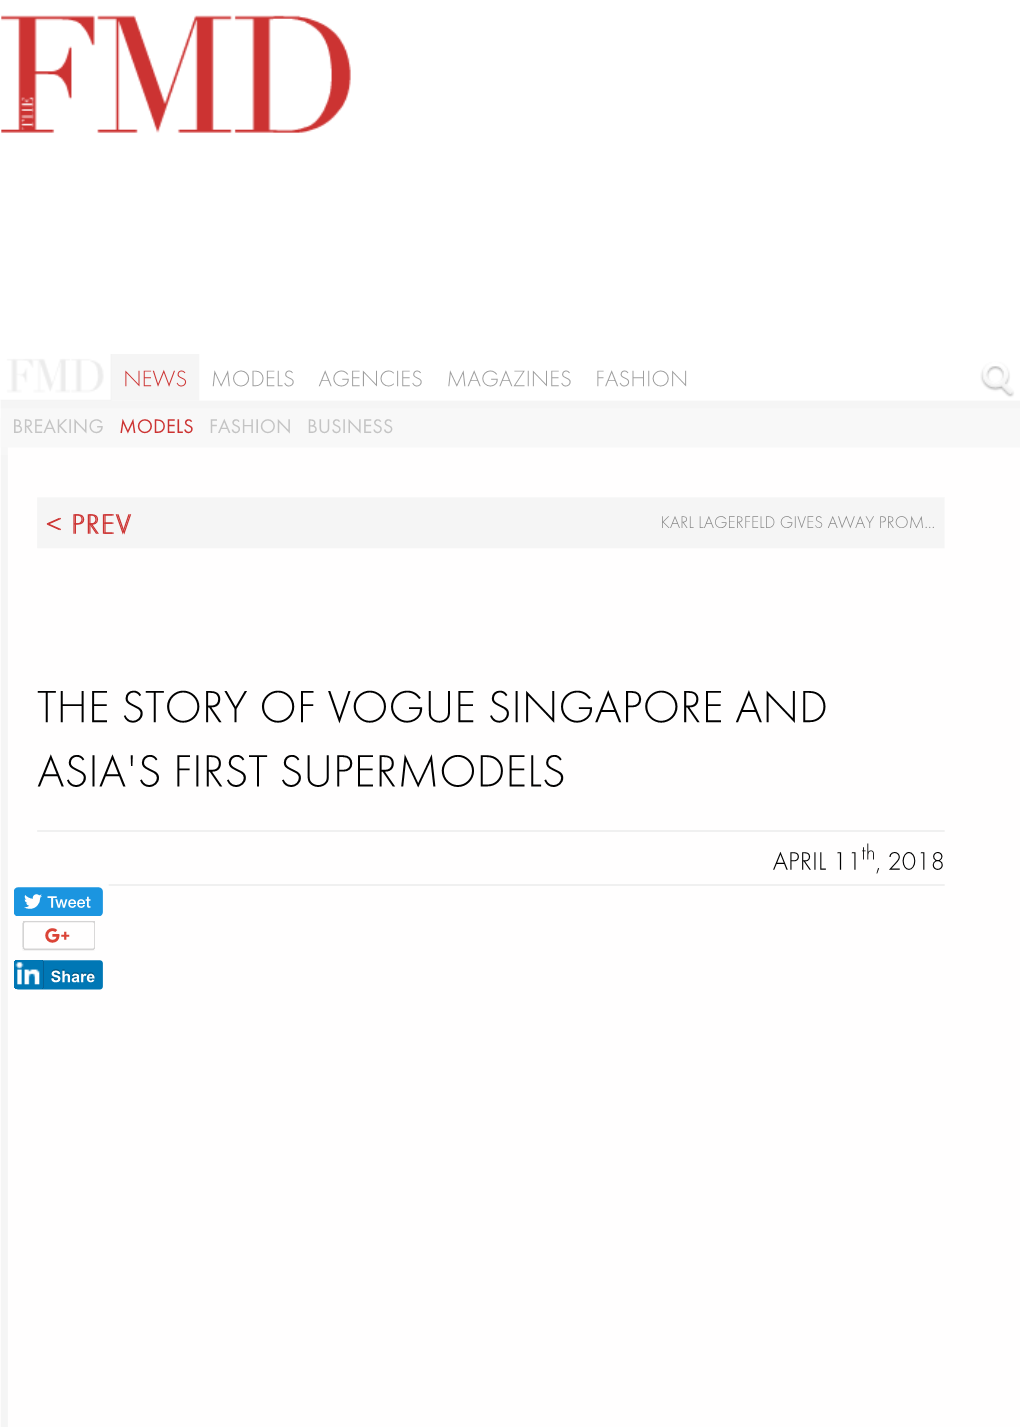 The Story of Vogue Singapore and Asia's First Supermodels